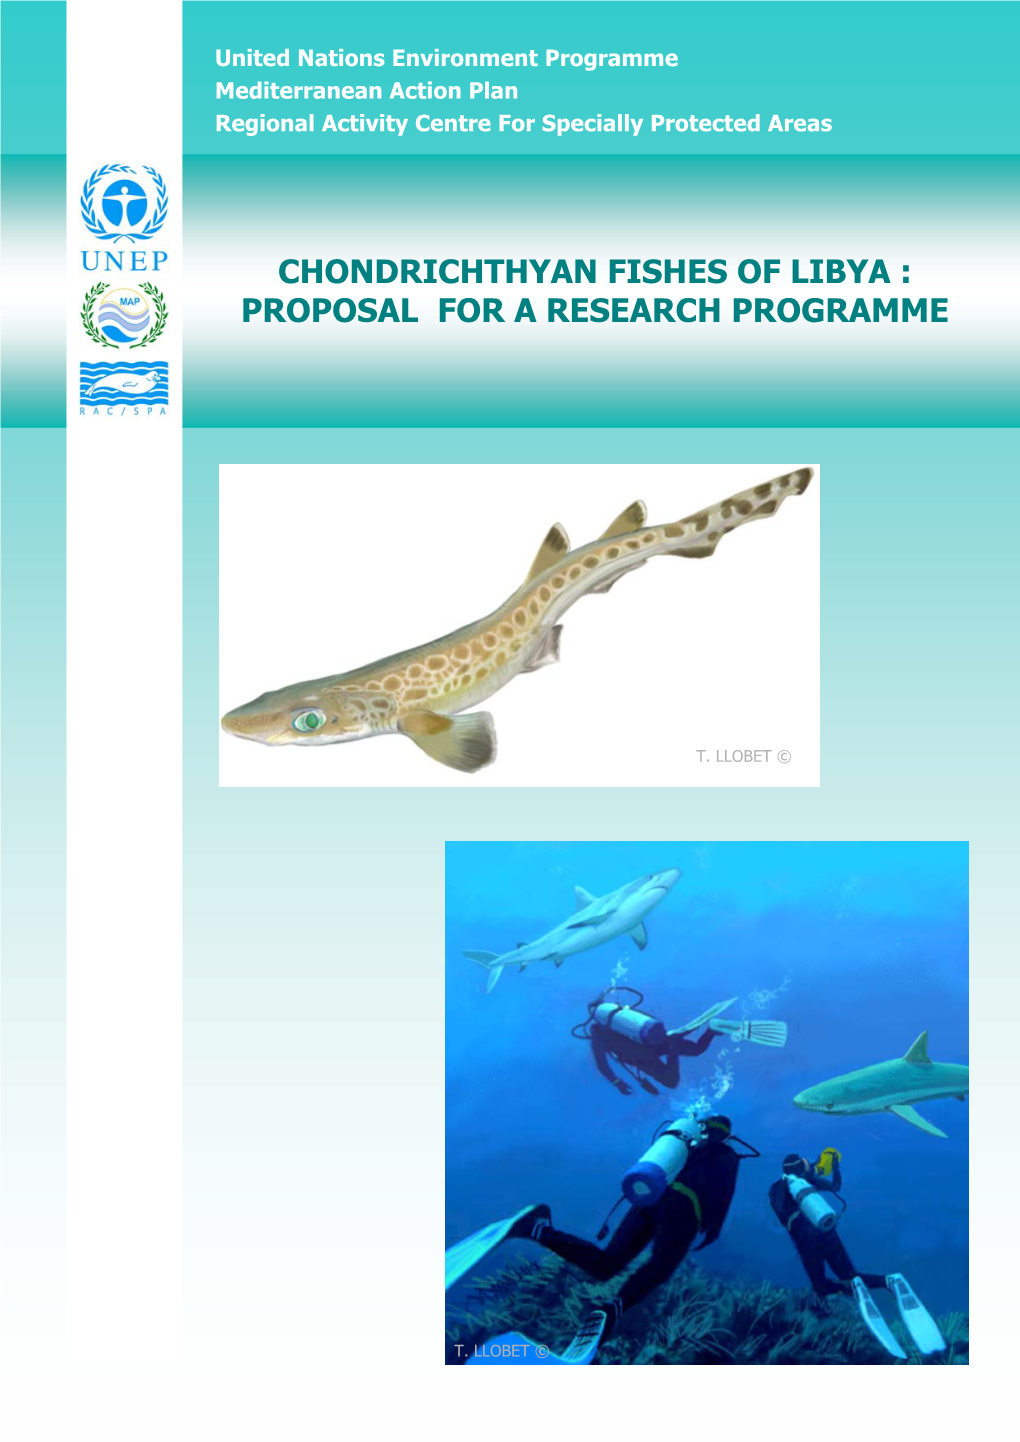 Chondrichthyan Fishes of Libya: Proposal for a Research Programme